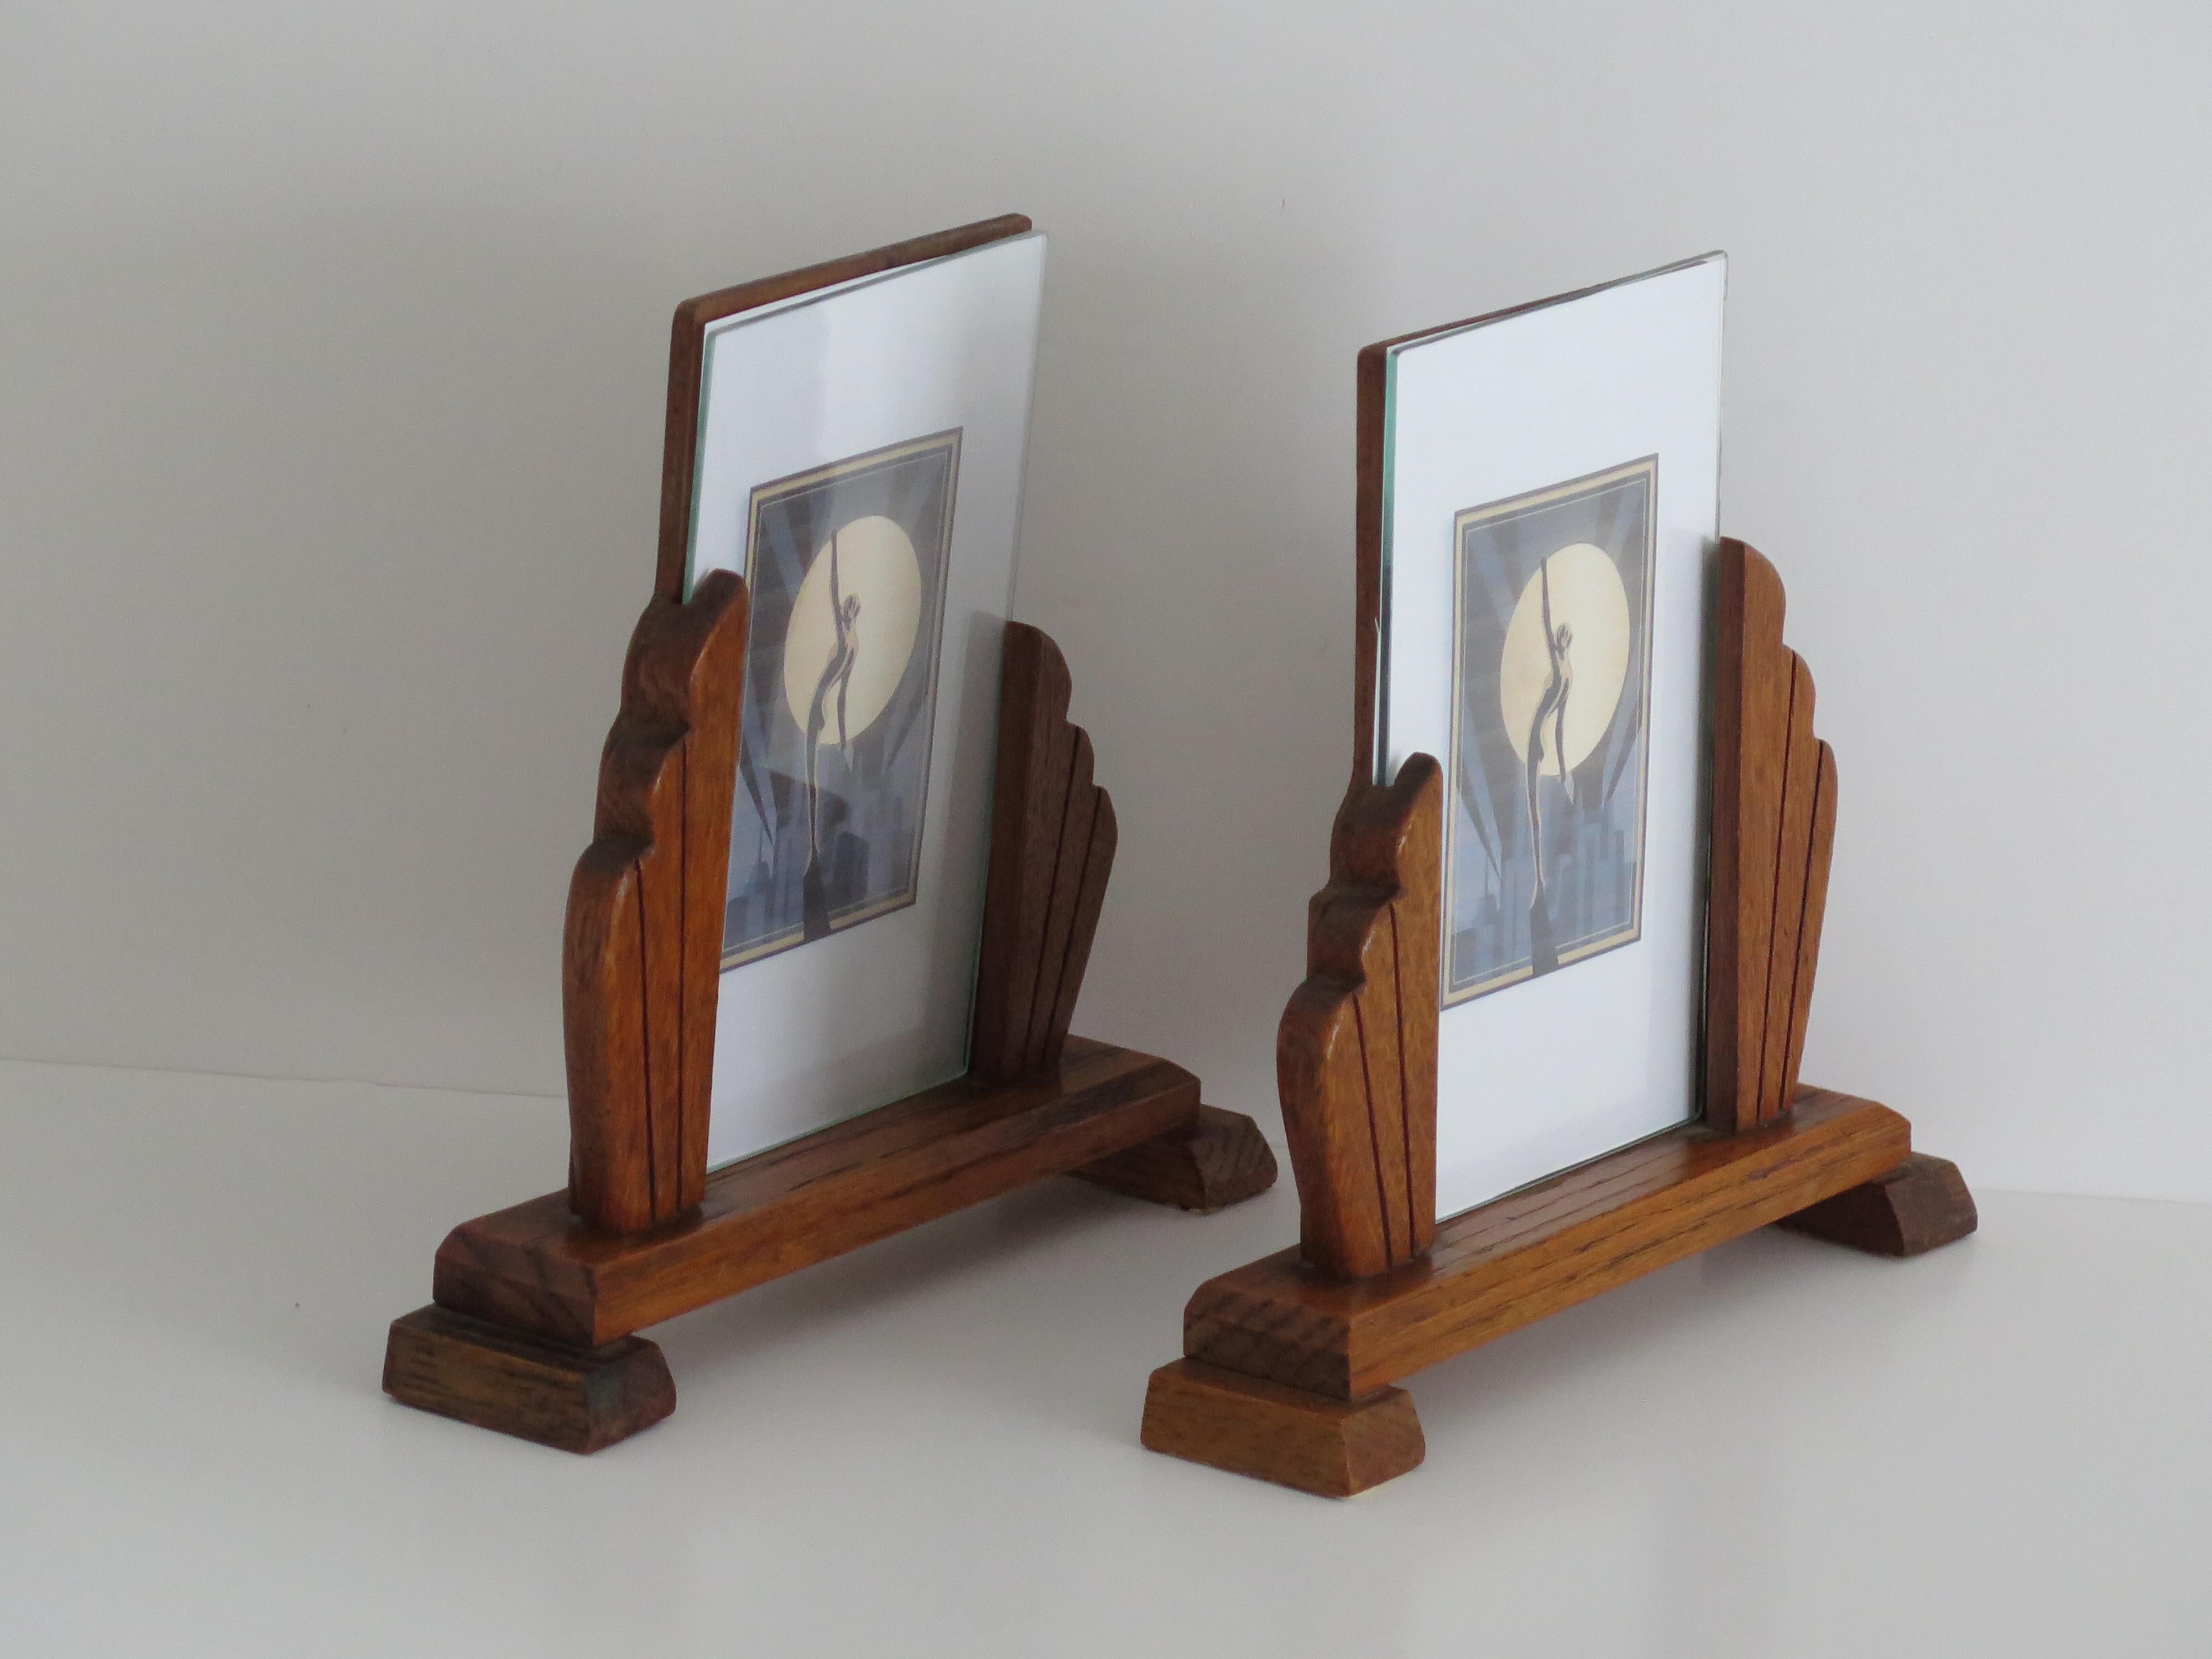 Hand-Crafted Art Deco PAIR of Period Photo Frames Handmade in Oak with Fan Sides, circa 1930 For Sale